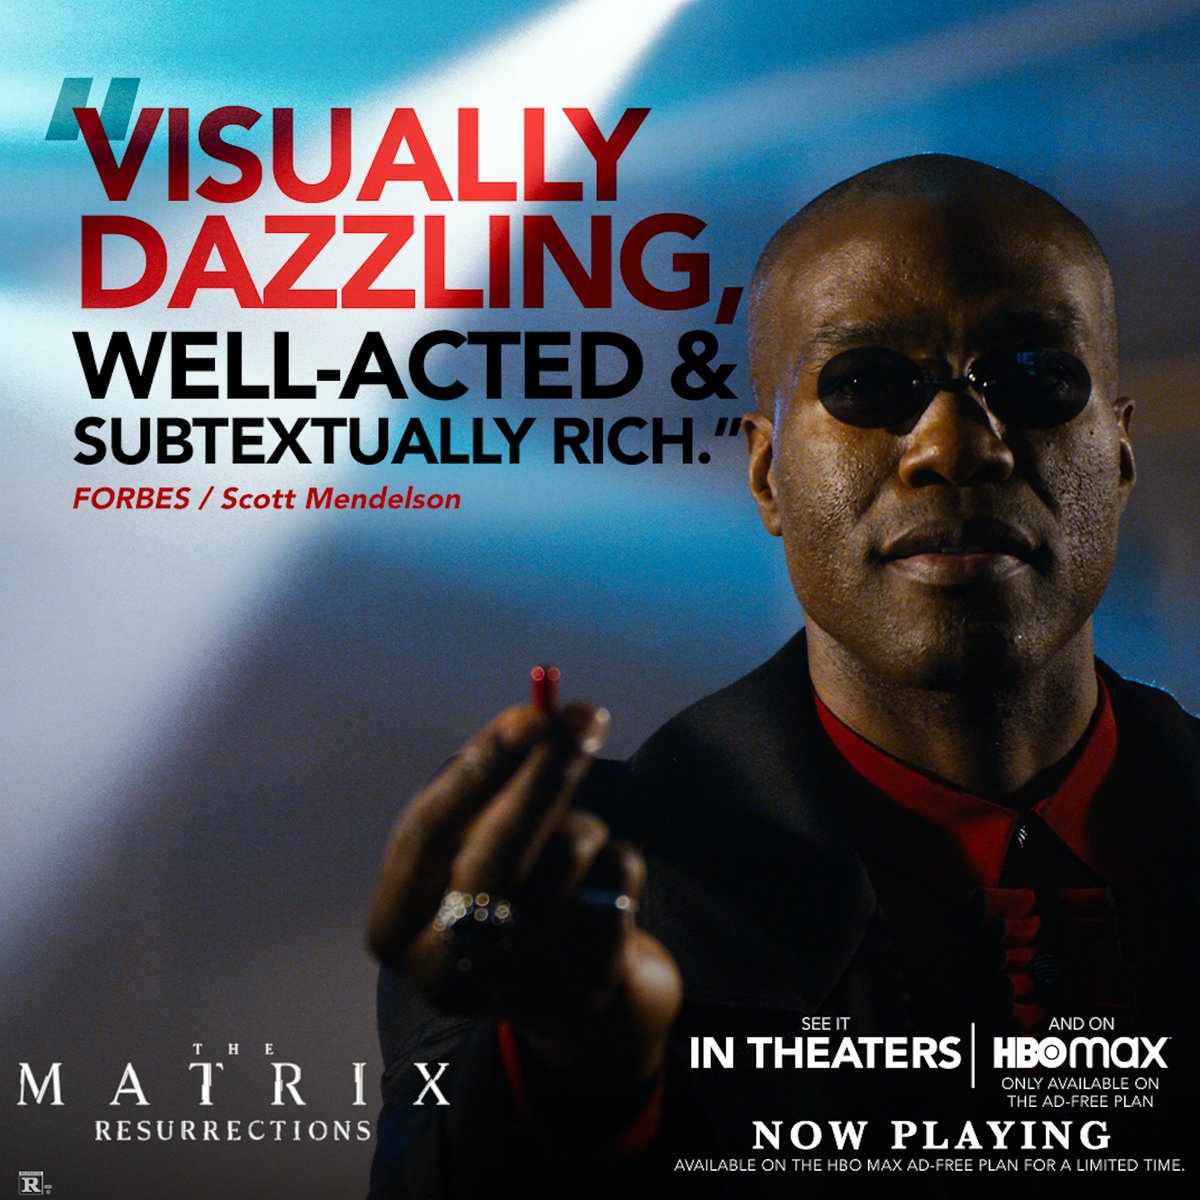 Have you followed the white rabbit yet? 🐇 @Forbes calls #TheMatrix Resurrections 'visually dazzling.' Watch it now in theaters and on HBO Max. Get tickets: WhatIsTheMatrix.com